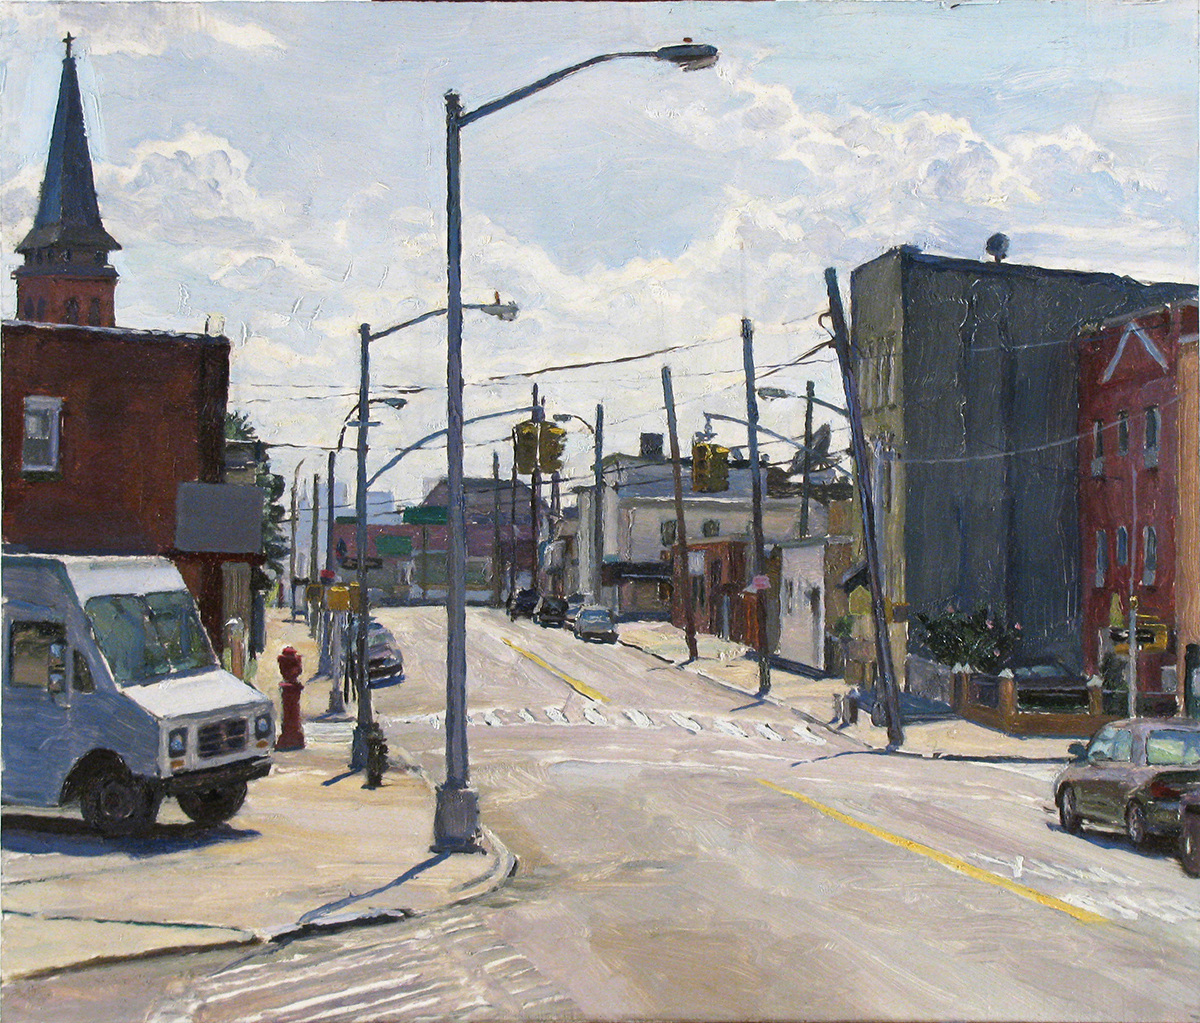  X-24: GREENPOINT AVE. at 39THST., QUEENS oil on panel 14 x 16” 2009 